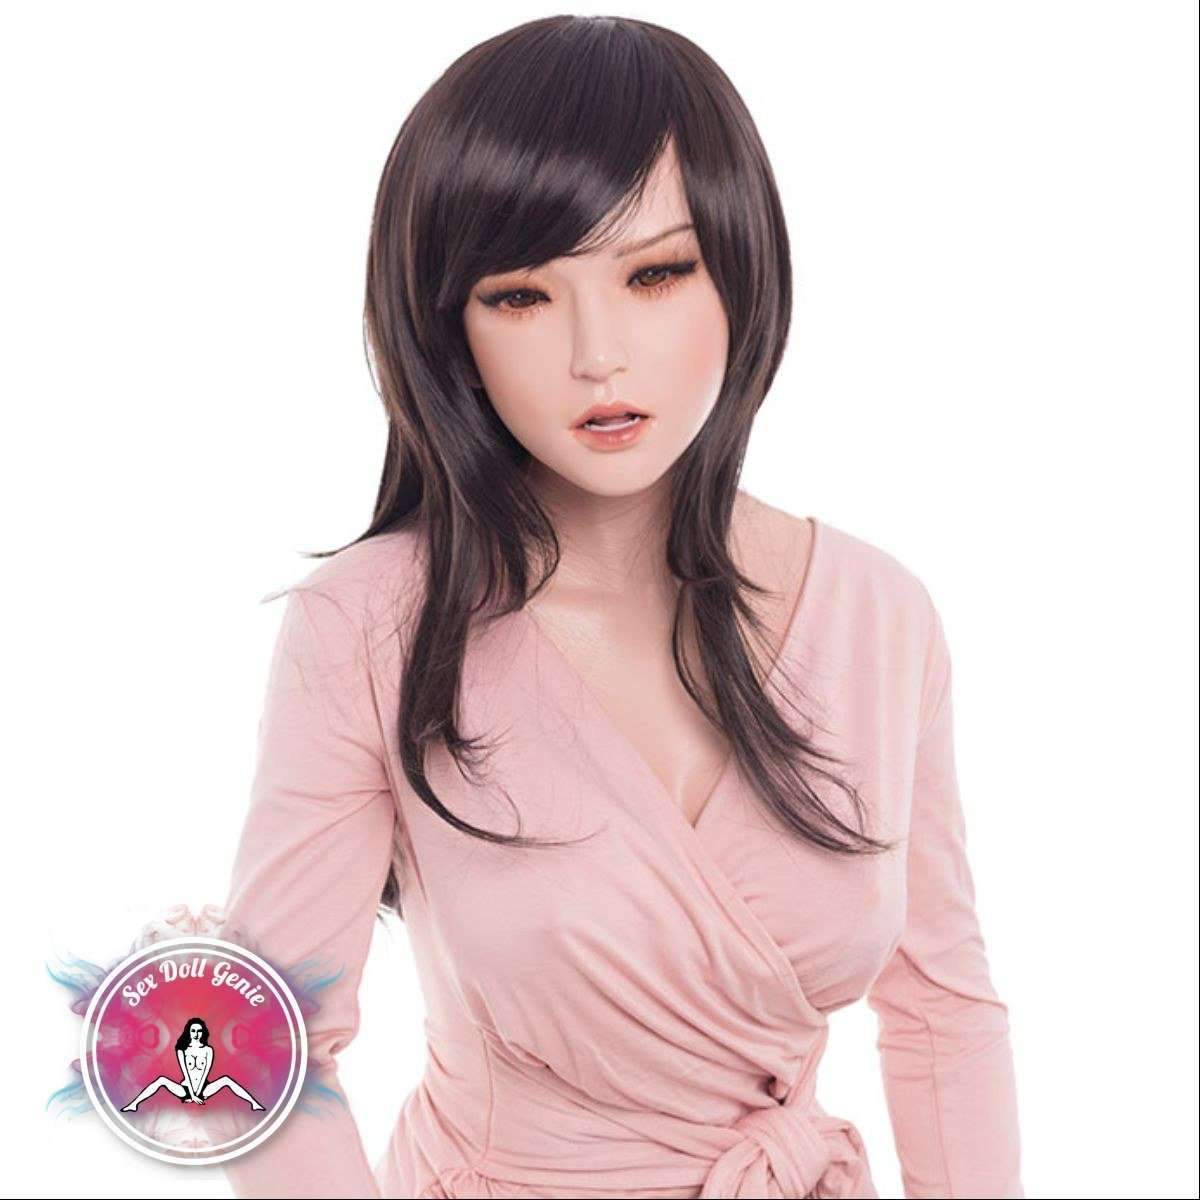 DS Doll - Ex-Lite - PU Foam Sex Doll D Cup Silicone Doll-24